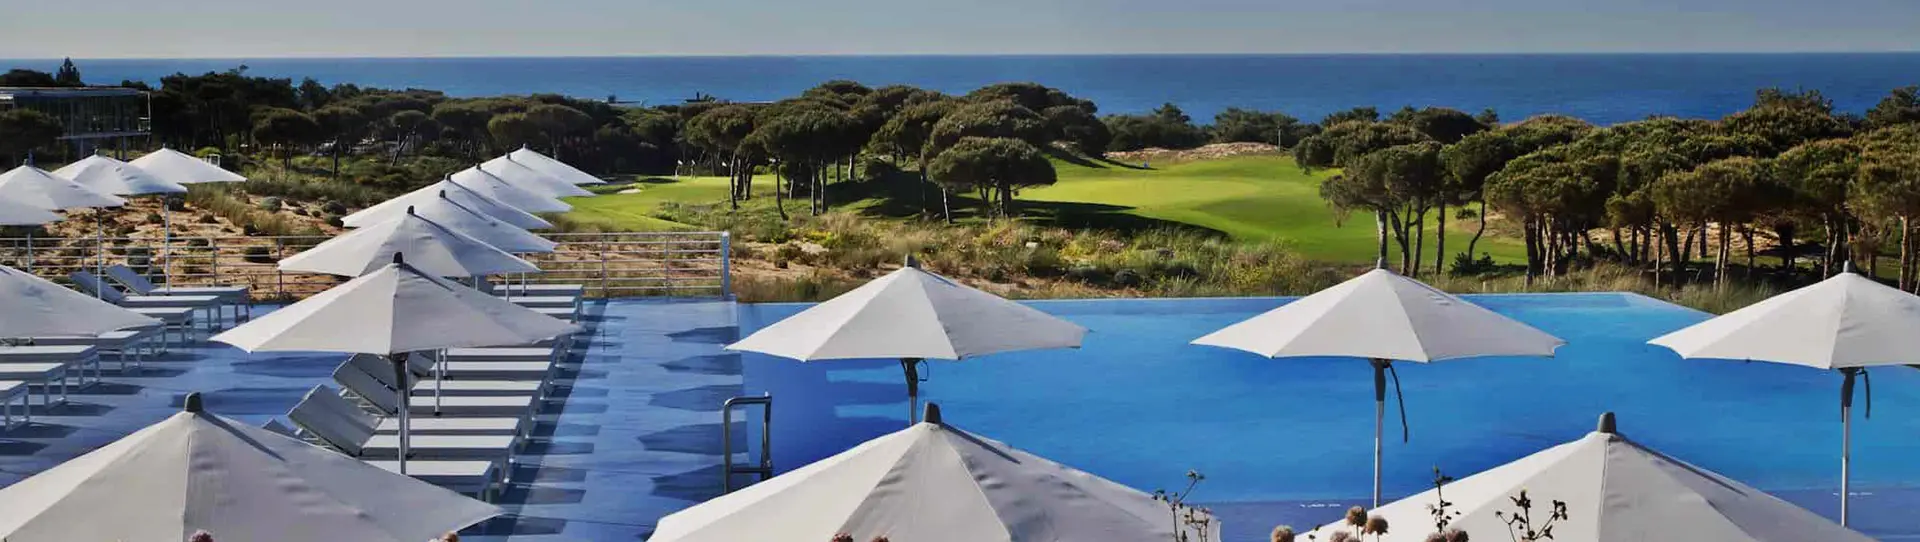 Portugal golf holidays - 7 Nights BB & 5 Golf Rounds <b>PRO Package</b> - Photo 2